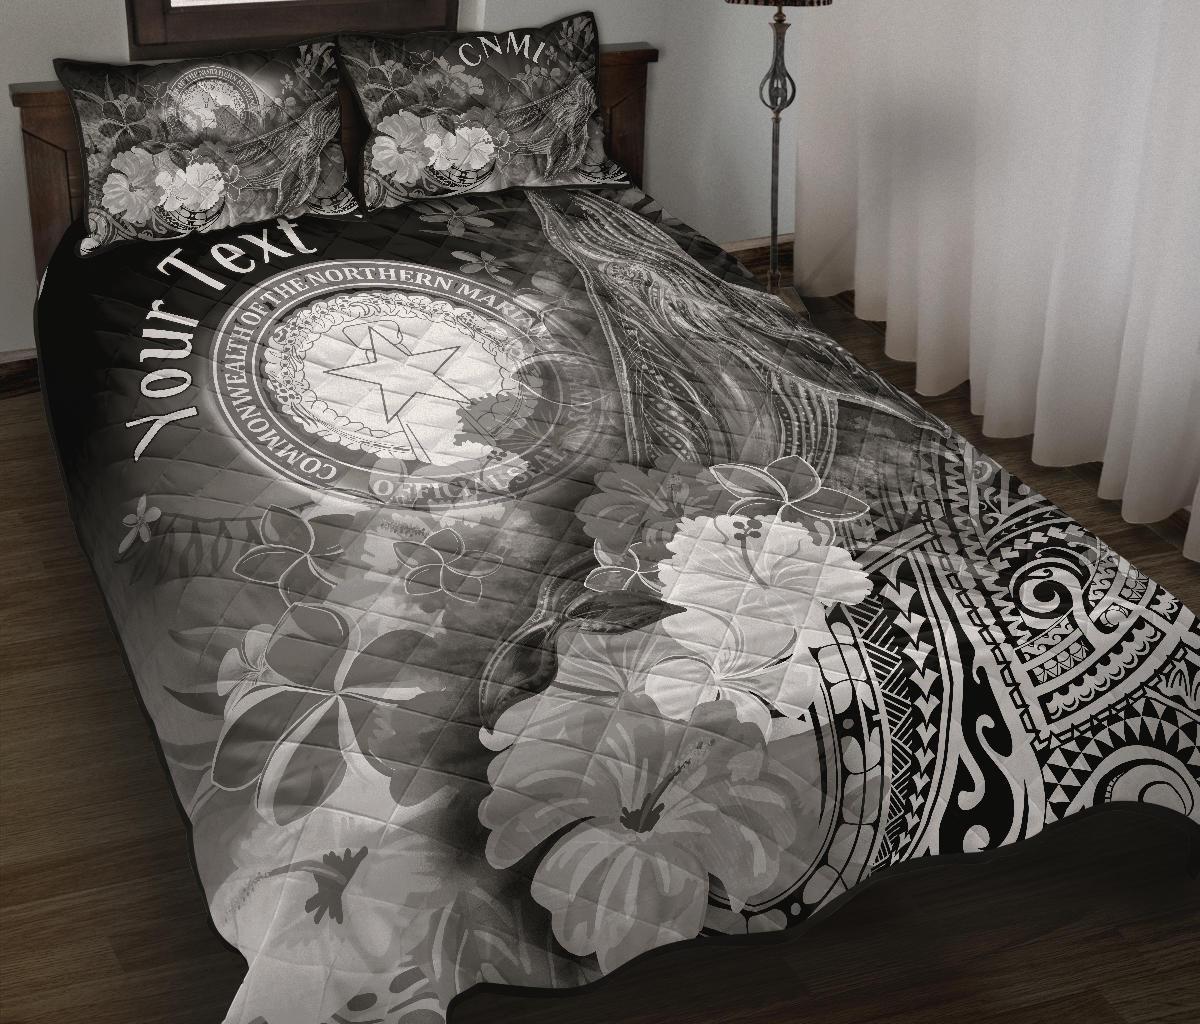 CNMI Custom Personalised Quilt Bed Set - Humpback Whale with Tropical Flowers (White) White - Polynesian Pride